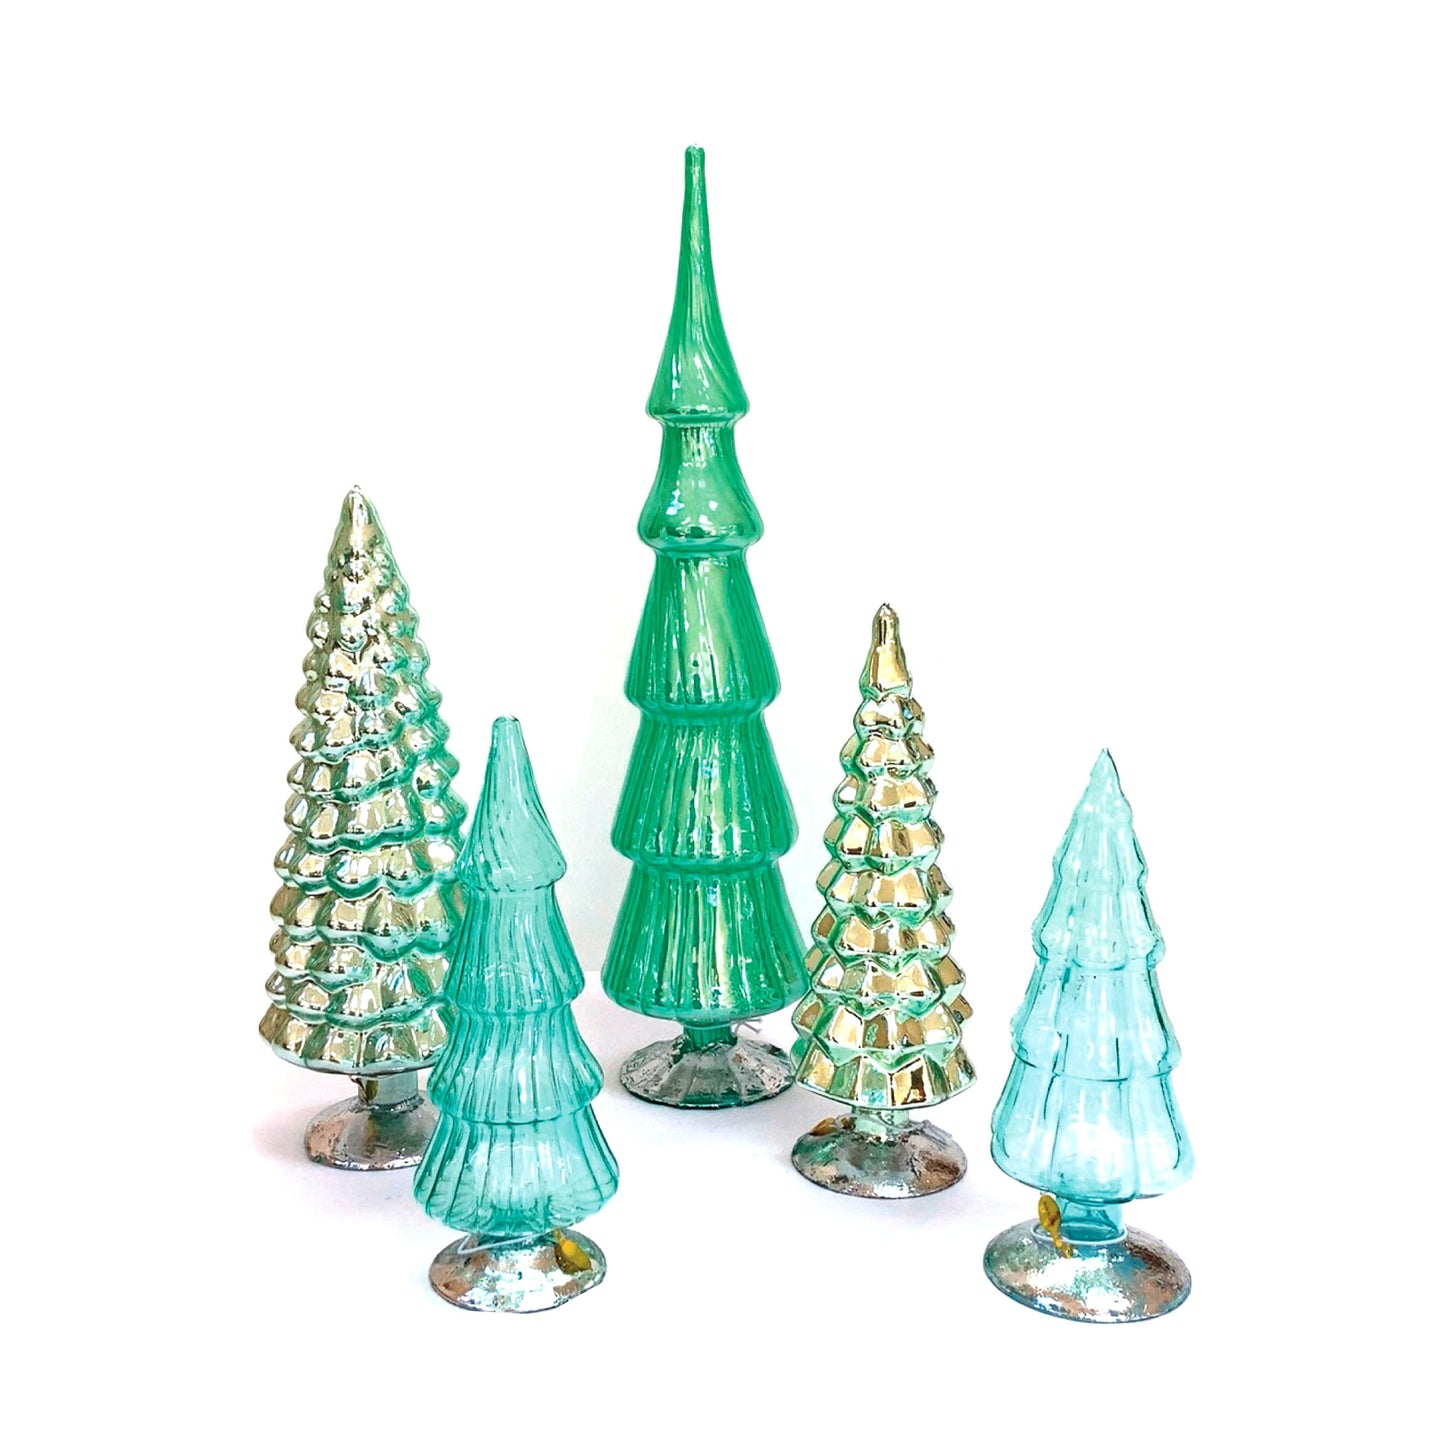 Wintergreen Hue Large Glass Trees, Set of 5